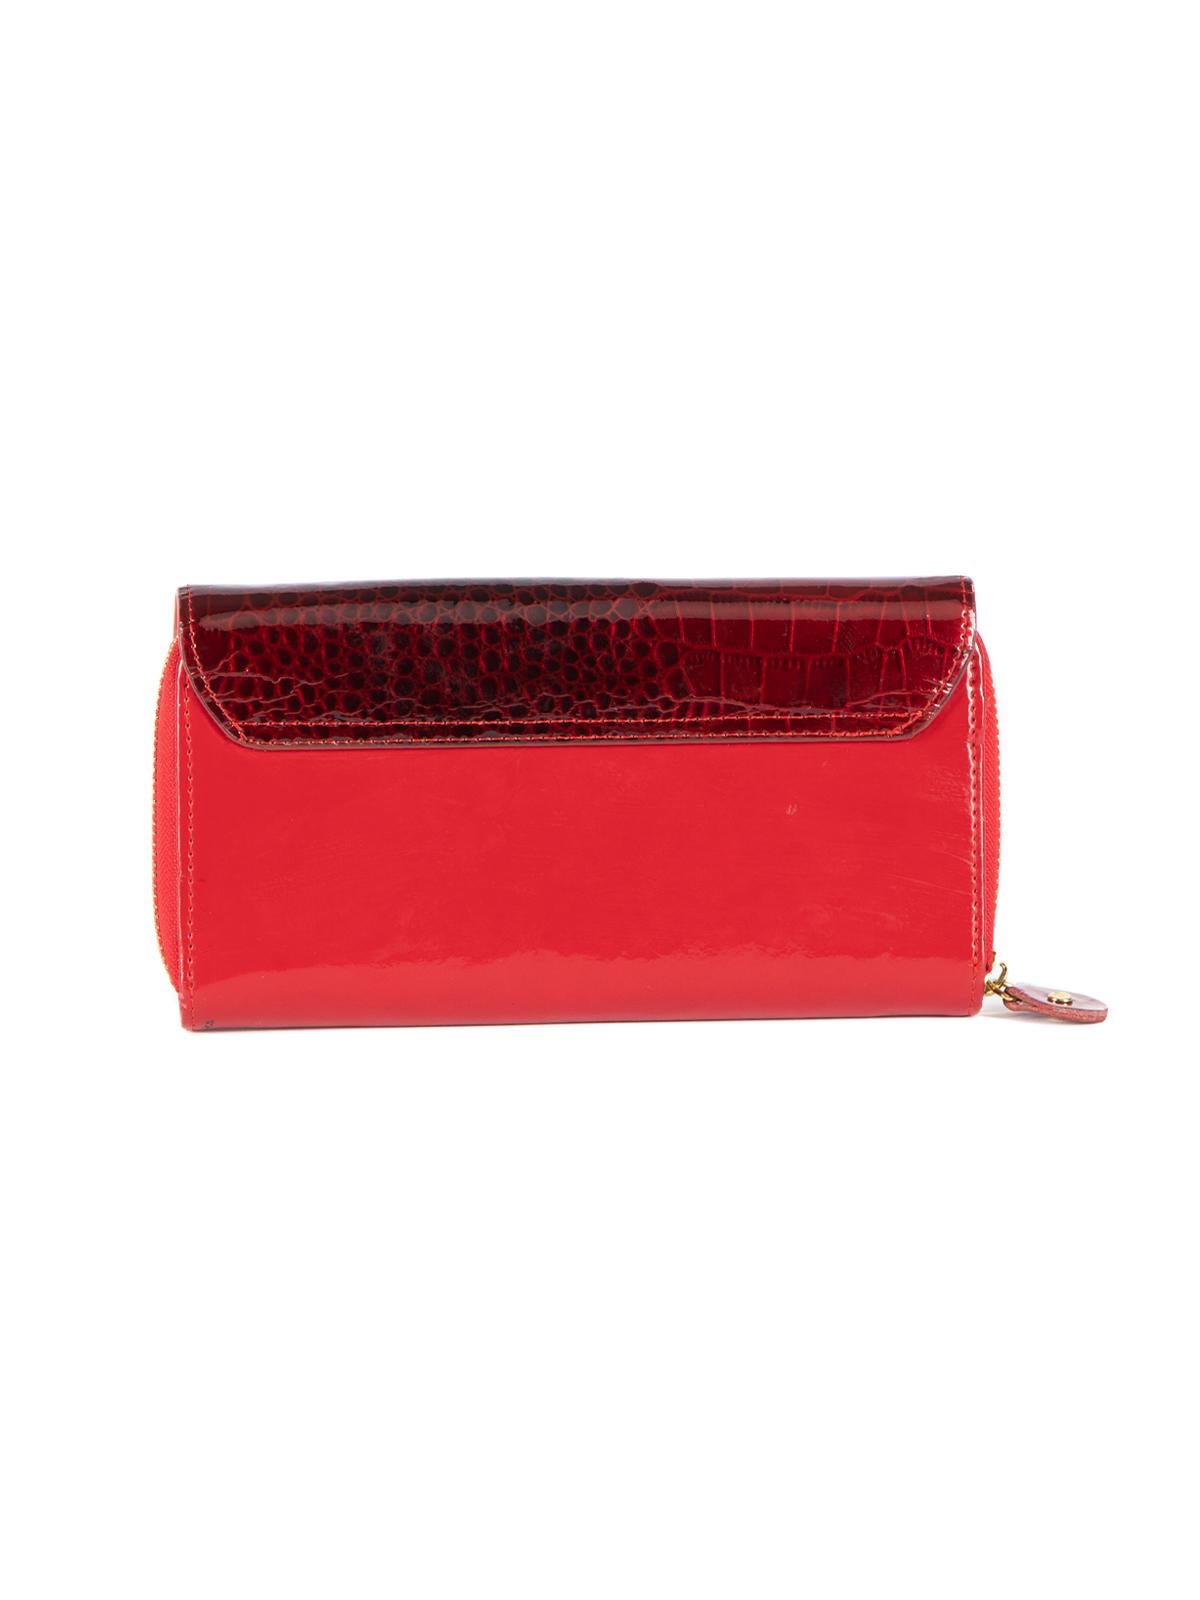 Pre-Loved Miu Miu Women's Red Patent Leather Wallet In Excellent Condition In London, GB